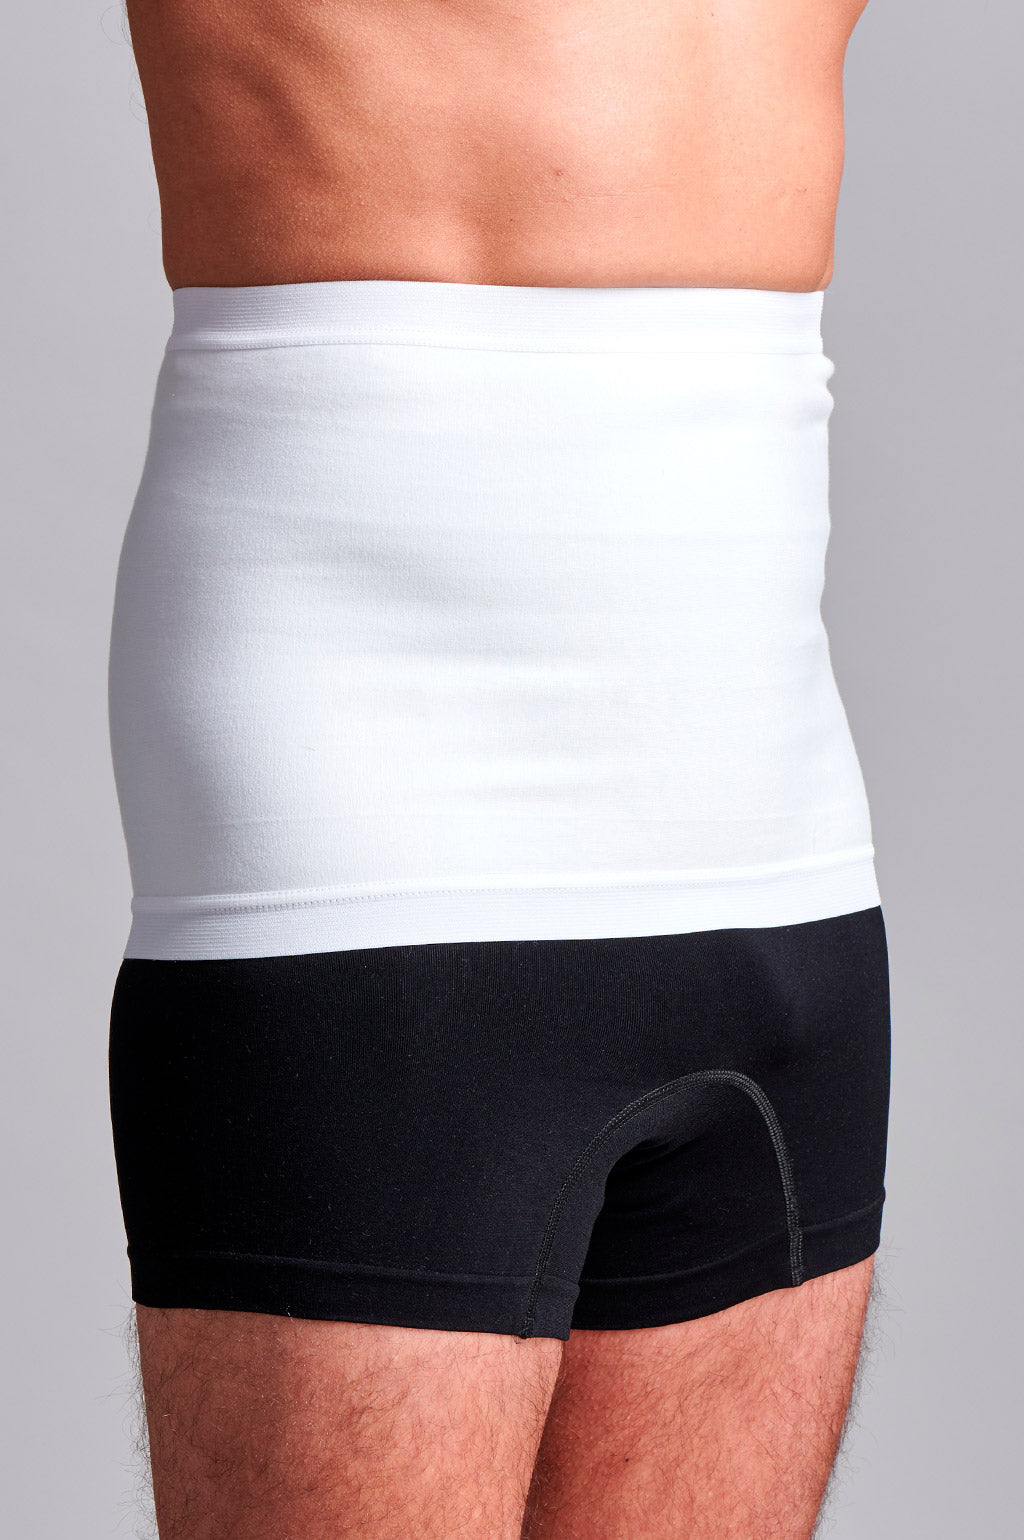 Low Waist Female Support Girdle - Suportx